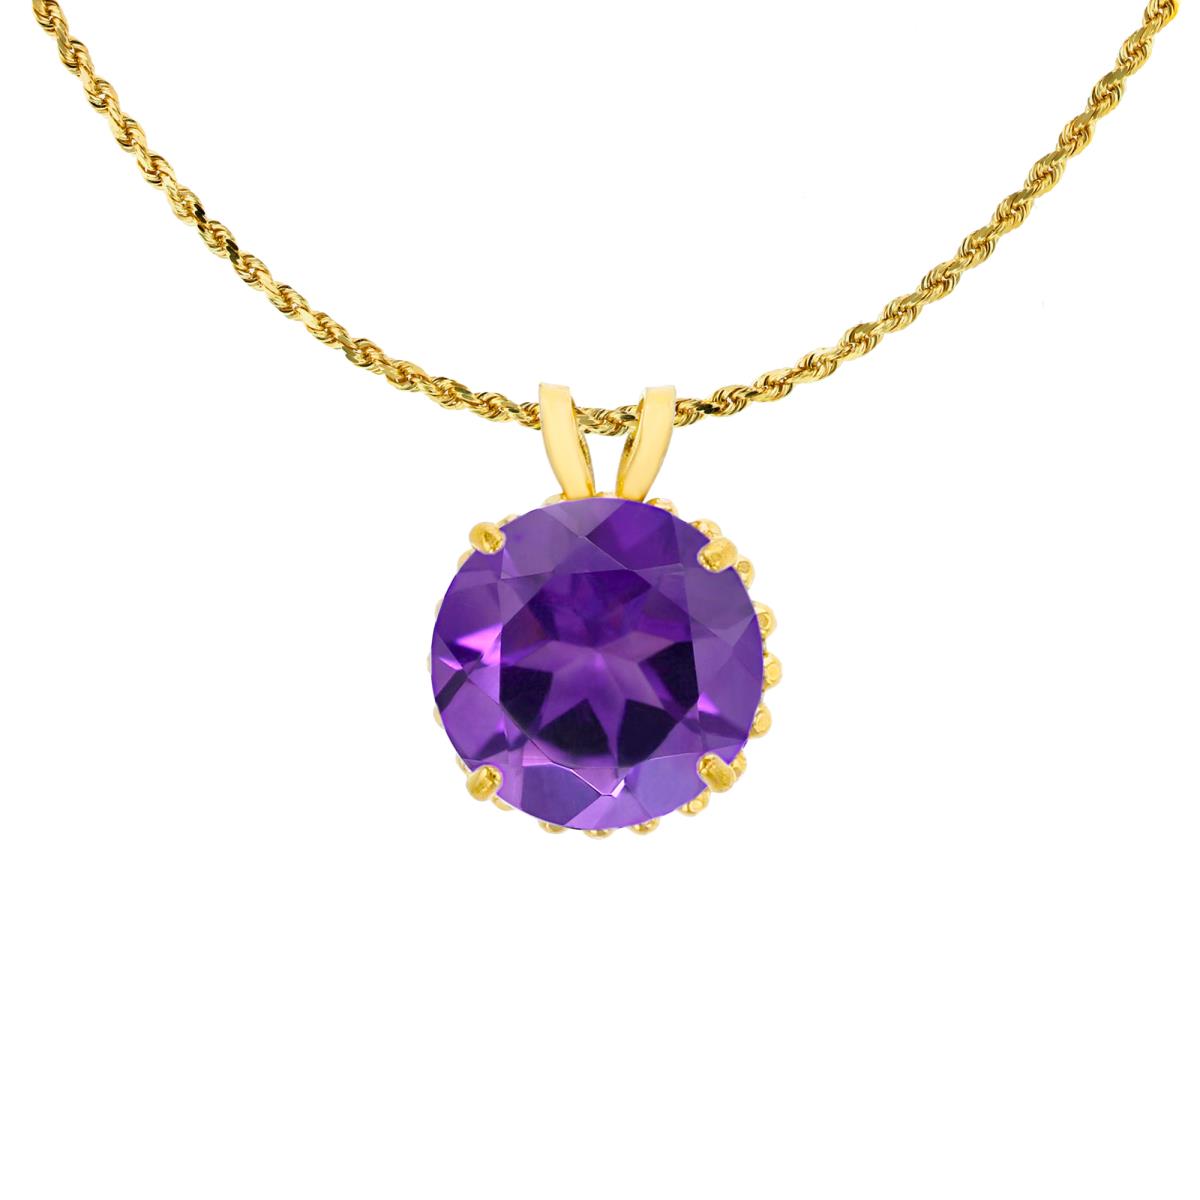 14K Yellow Gold 7mm Rd Cut Amethyst with Bead Frame Rabbit Ear 18" Rope Chain Necklace